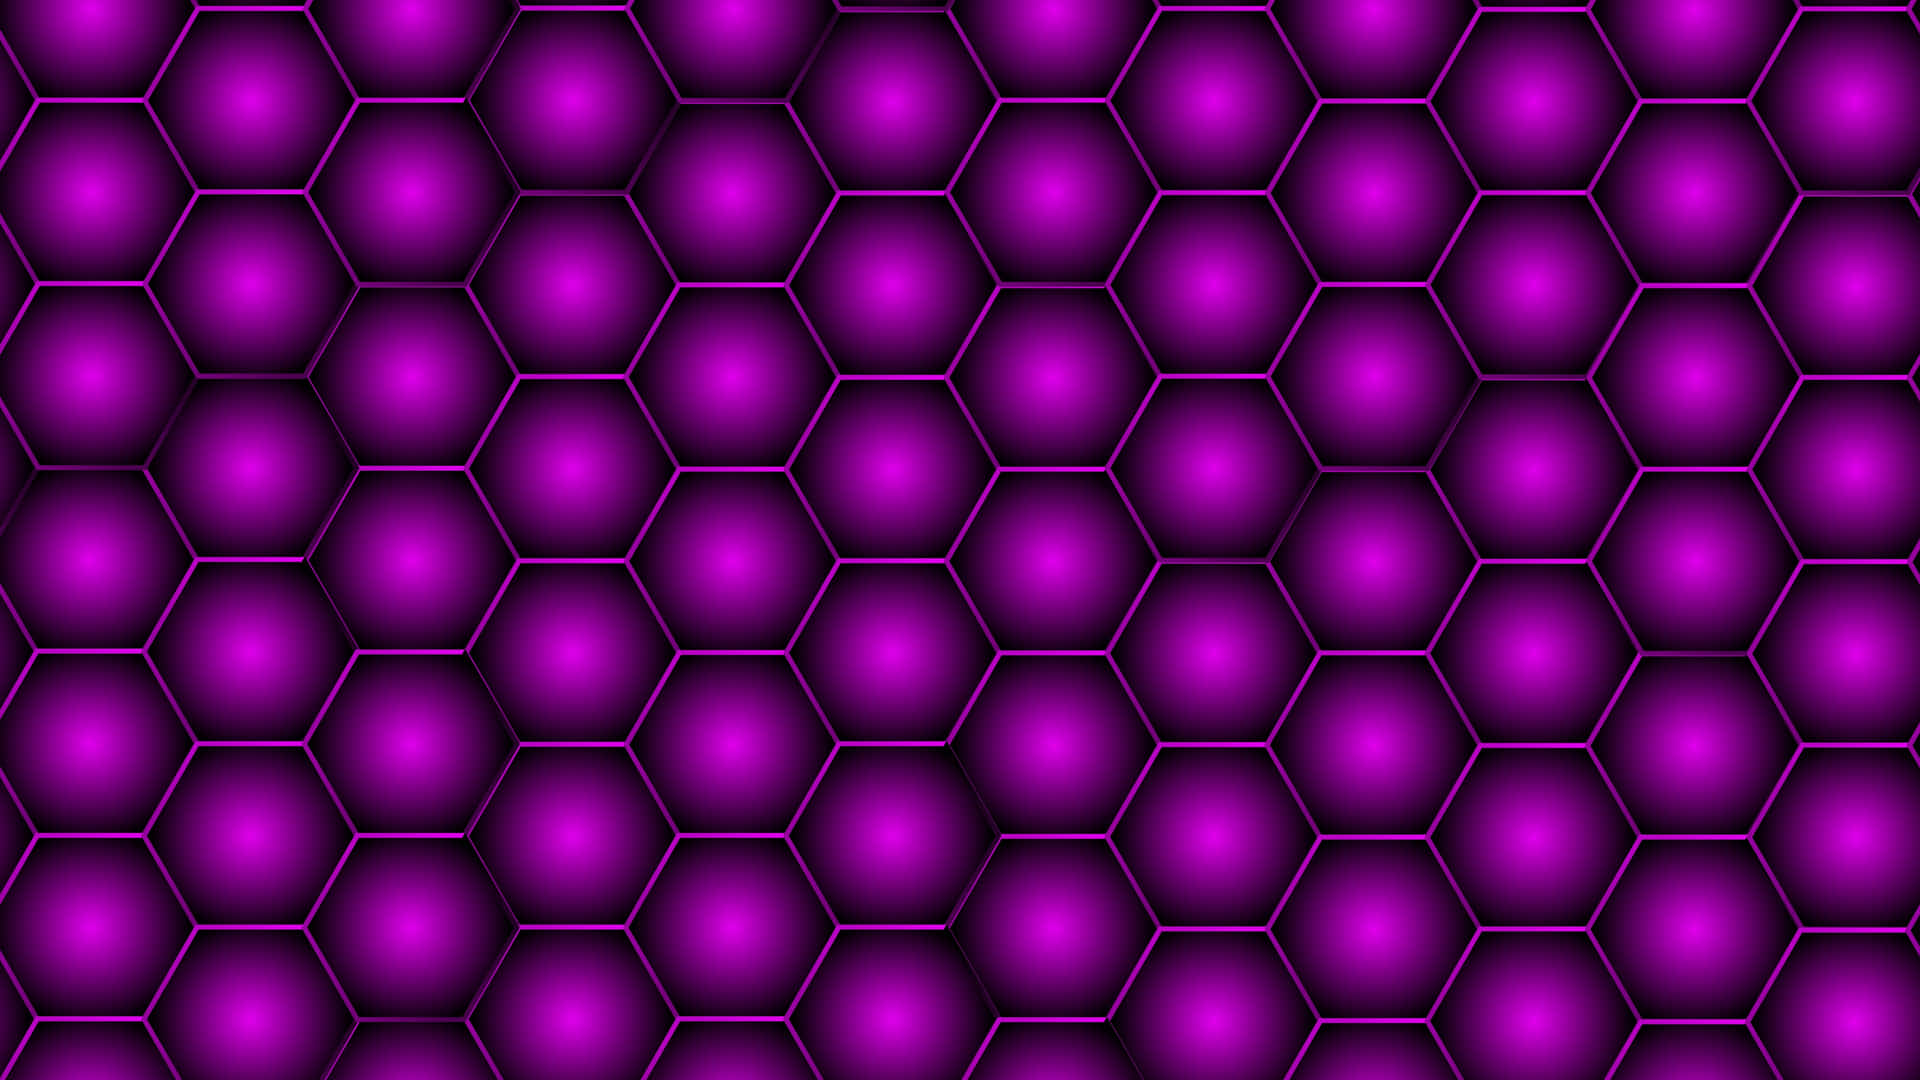 Abstract Shapes in Hexagon Patterns Wallpaper